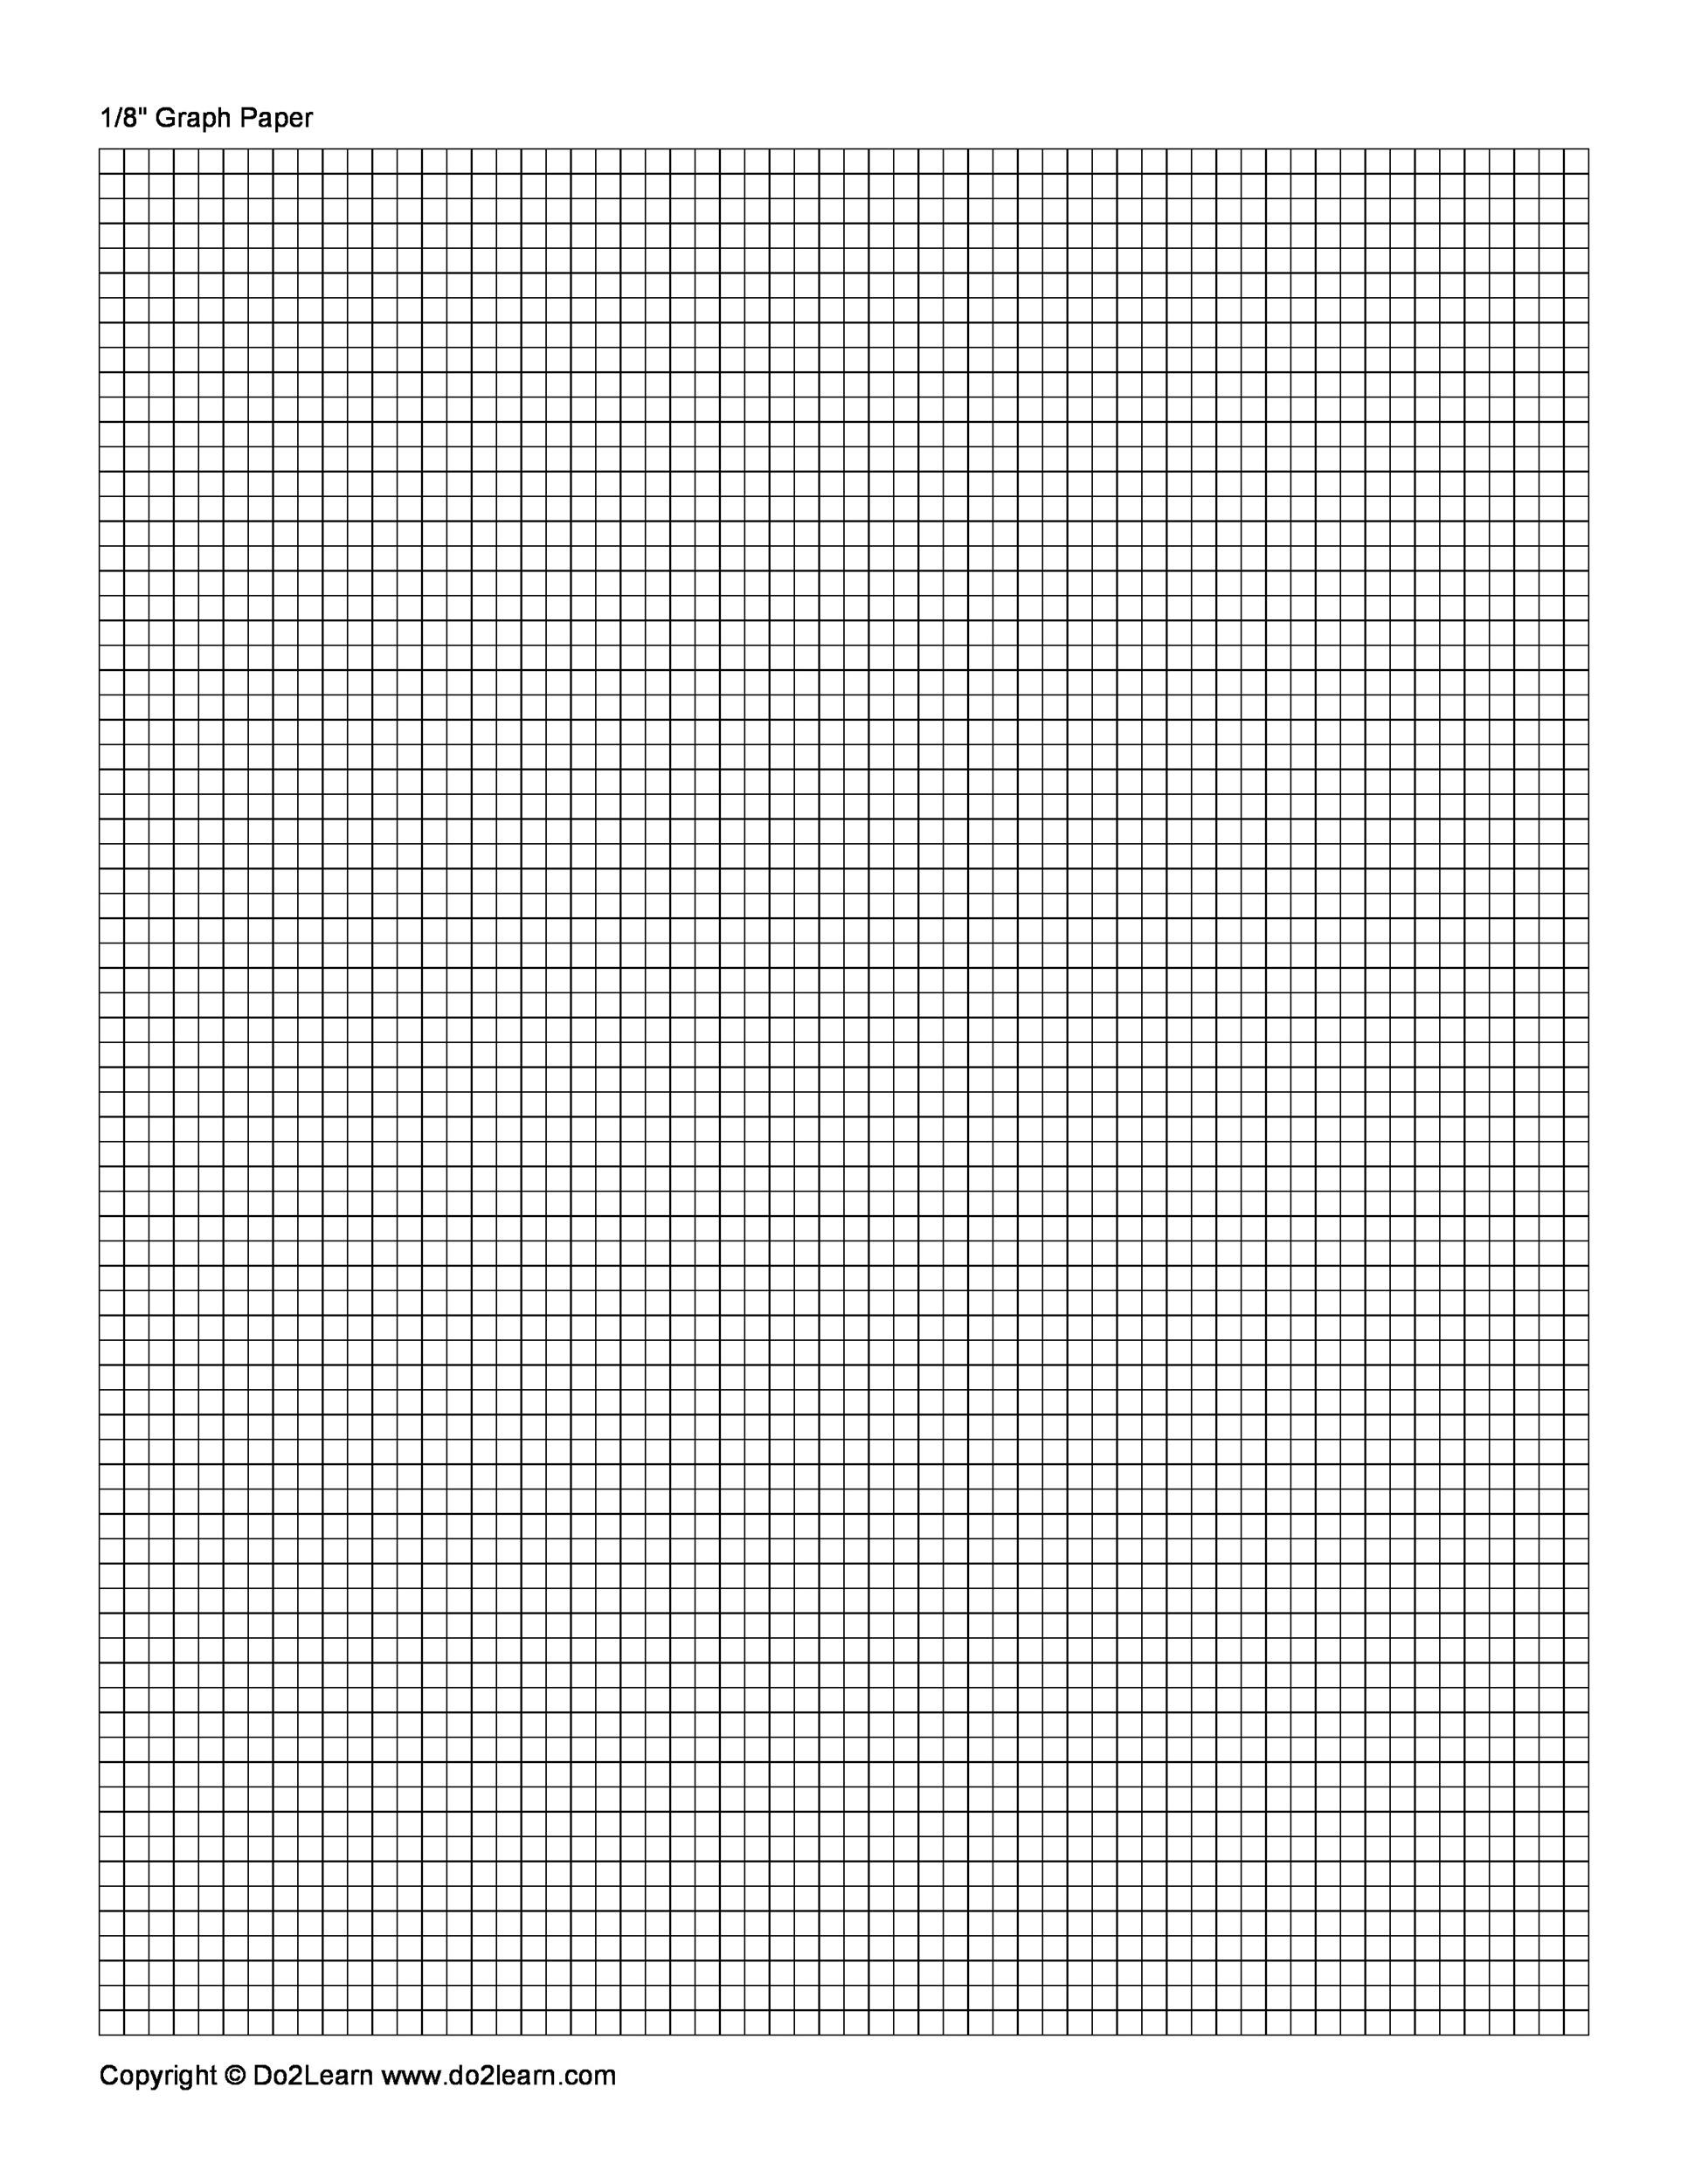 30+ Free Printable Graph Paper Templates (Word, PDF) - Template Lab